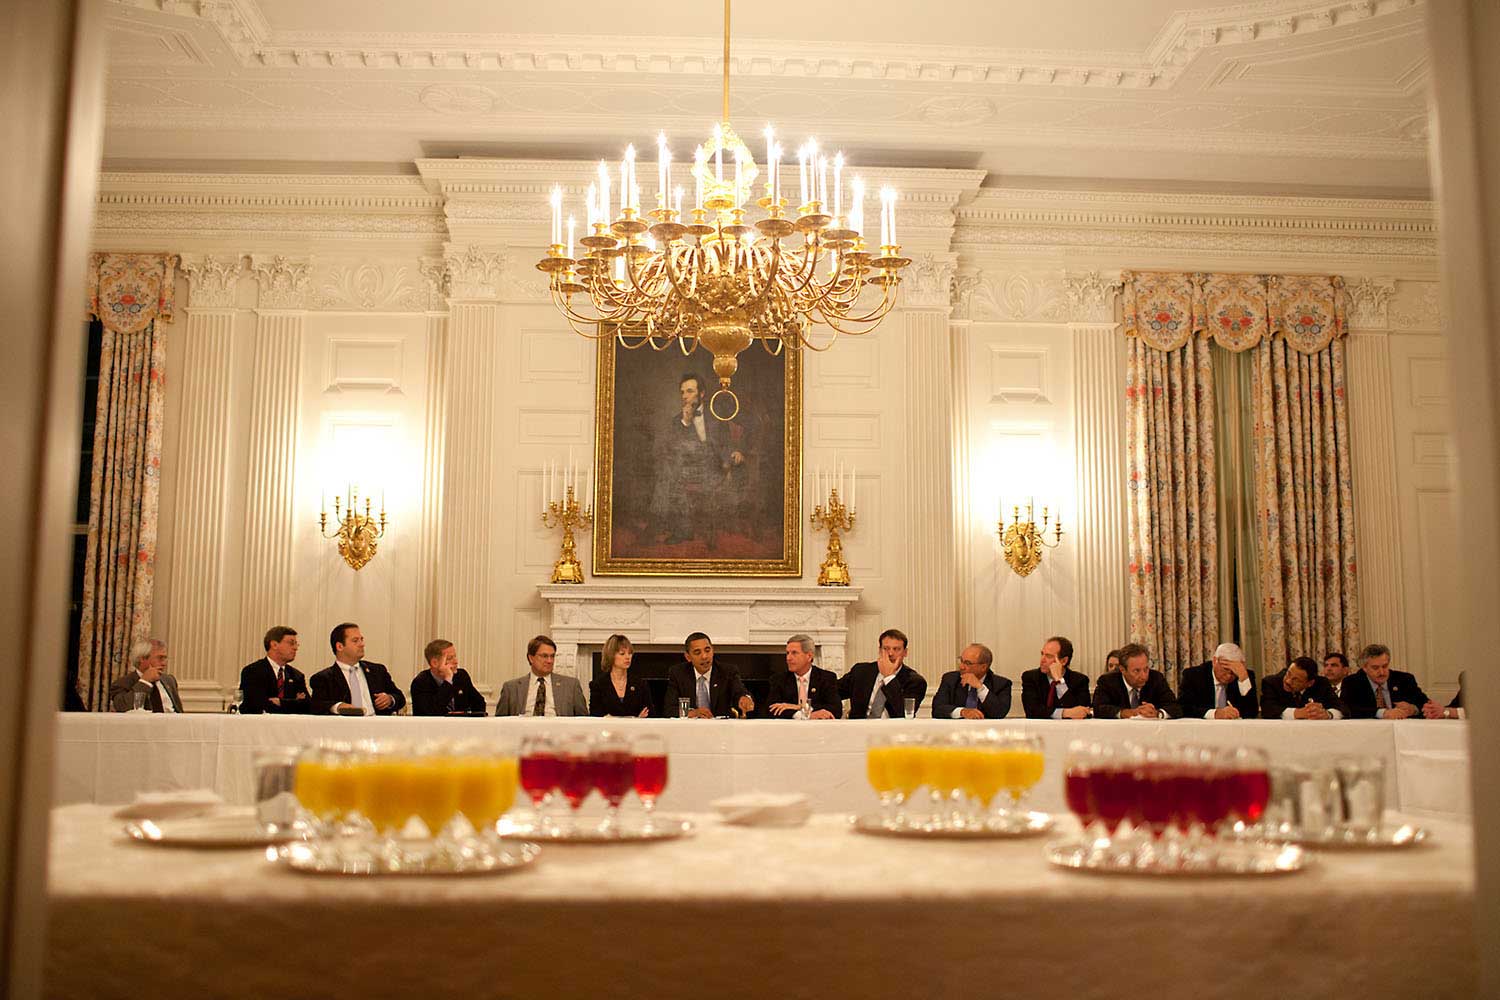 President Obama meets with the Democratic Blue Dog Coalition in the State Dining Room, Feb. 10, 2009.